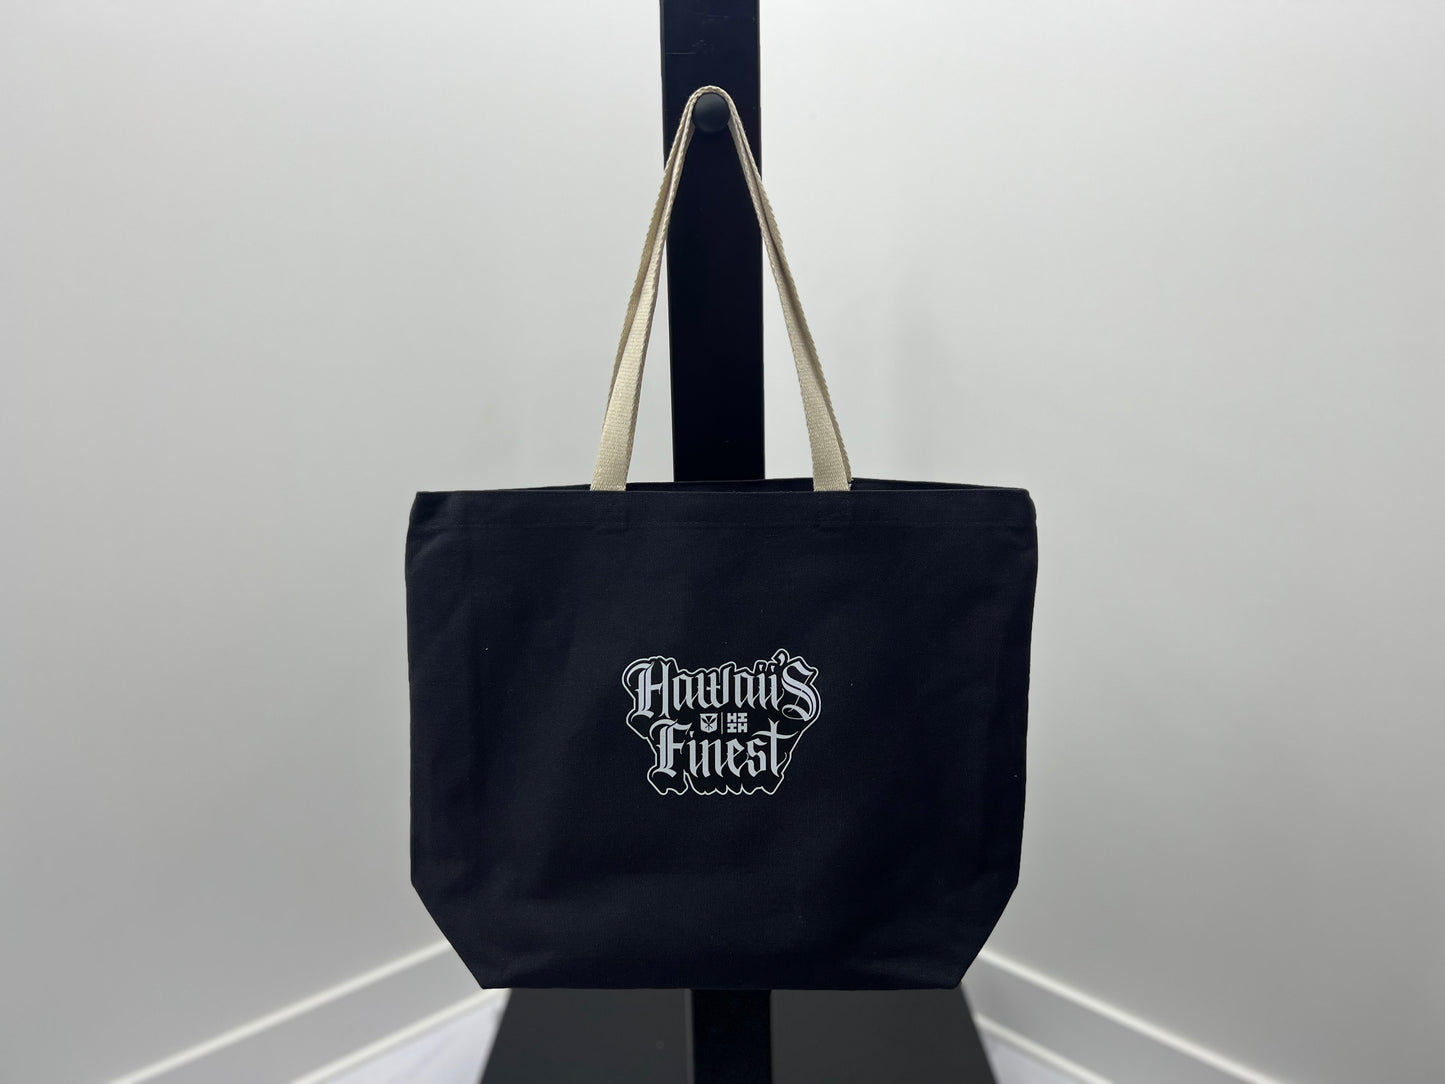 Totebag - Hawaii's Finest Old English